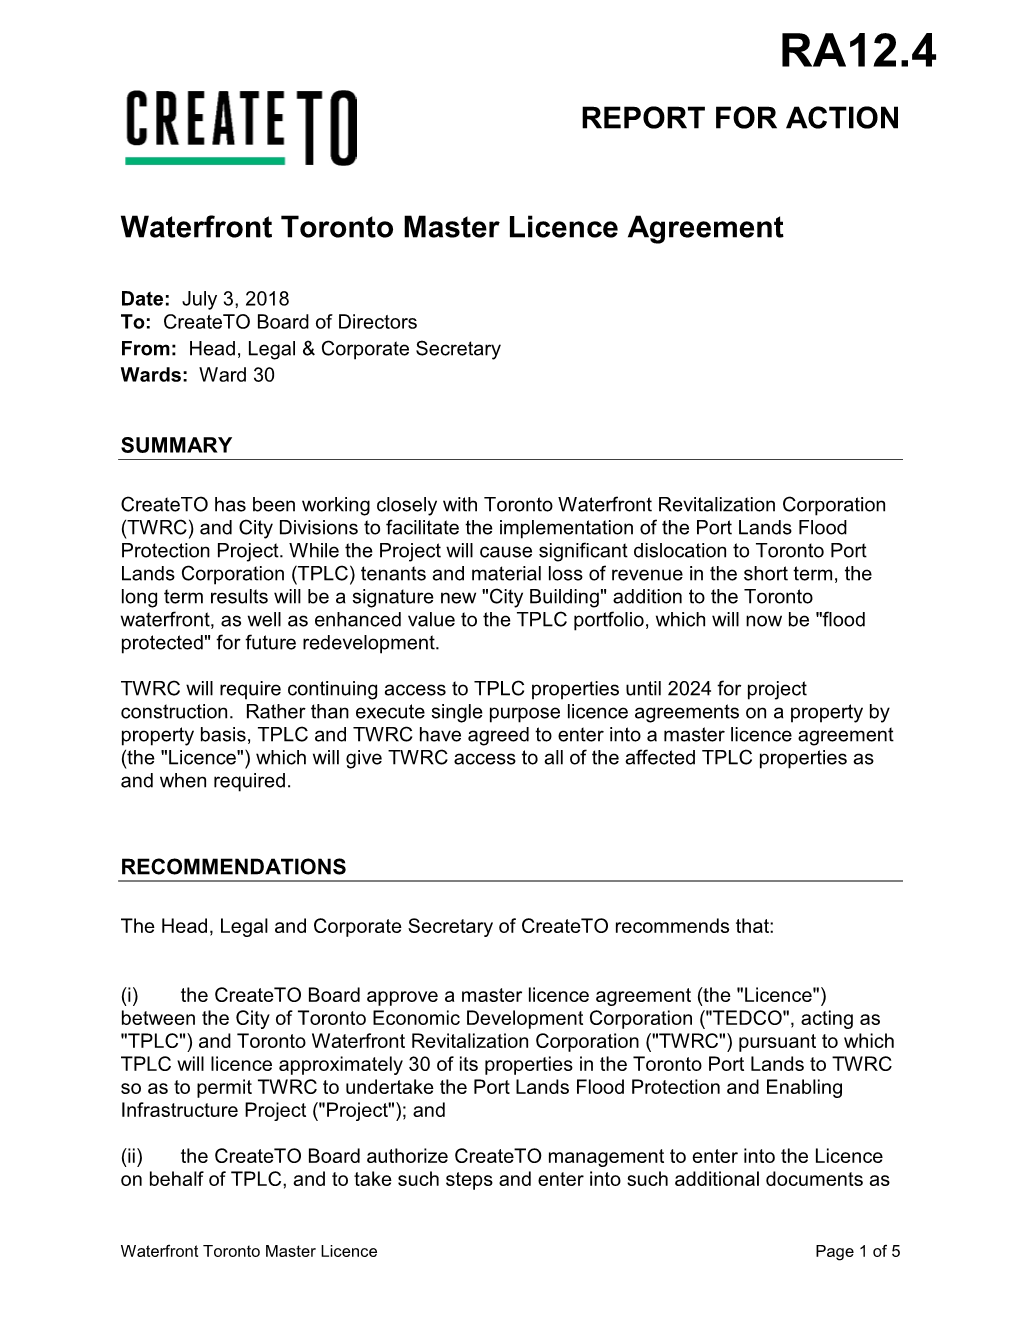 Waterfront Toronto Master Licence Agreement